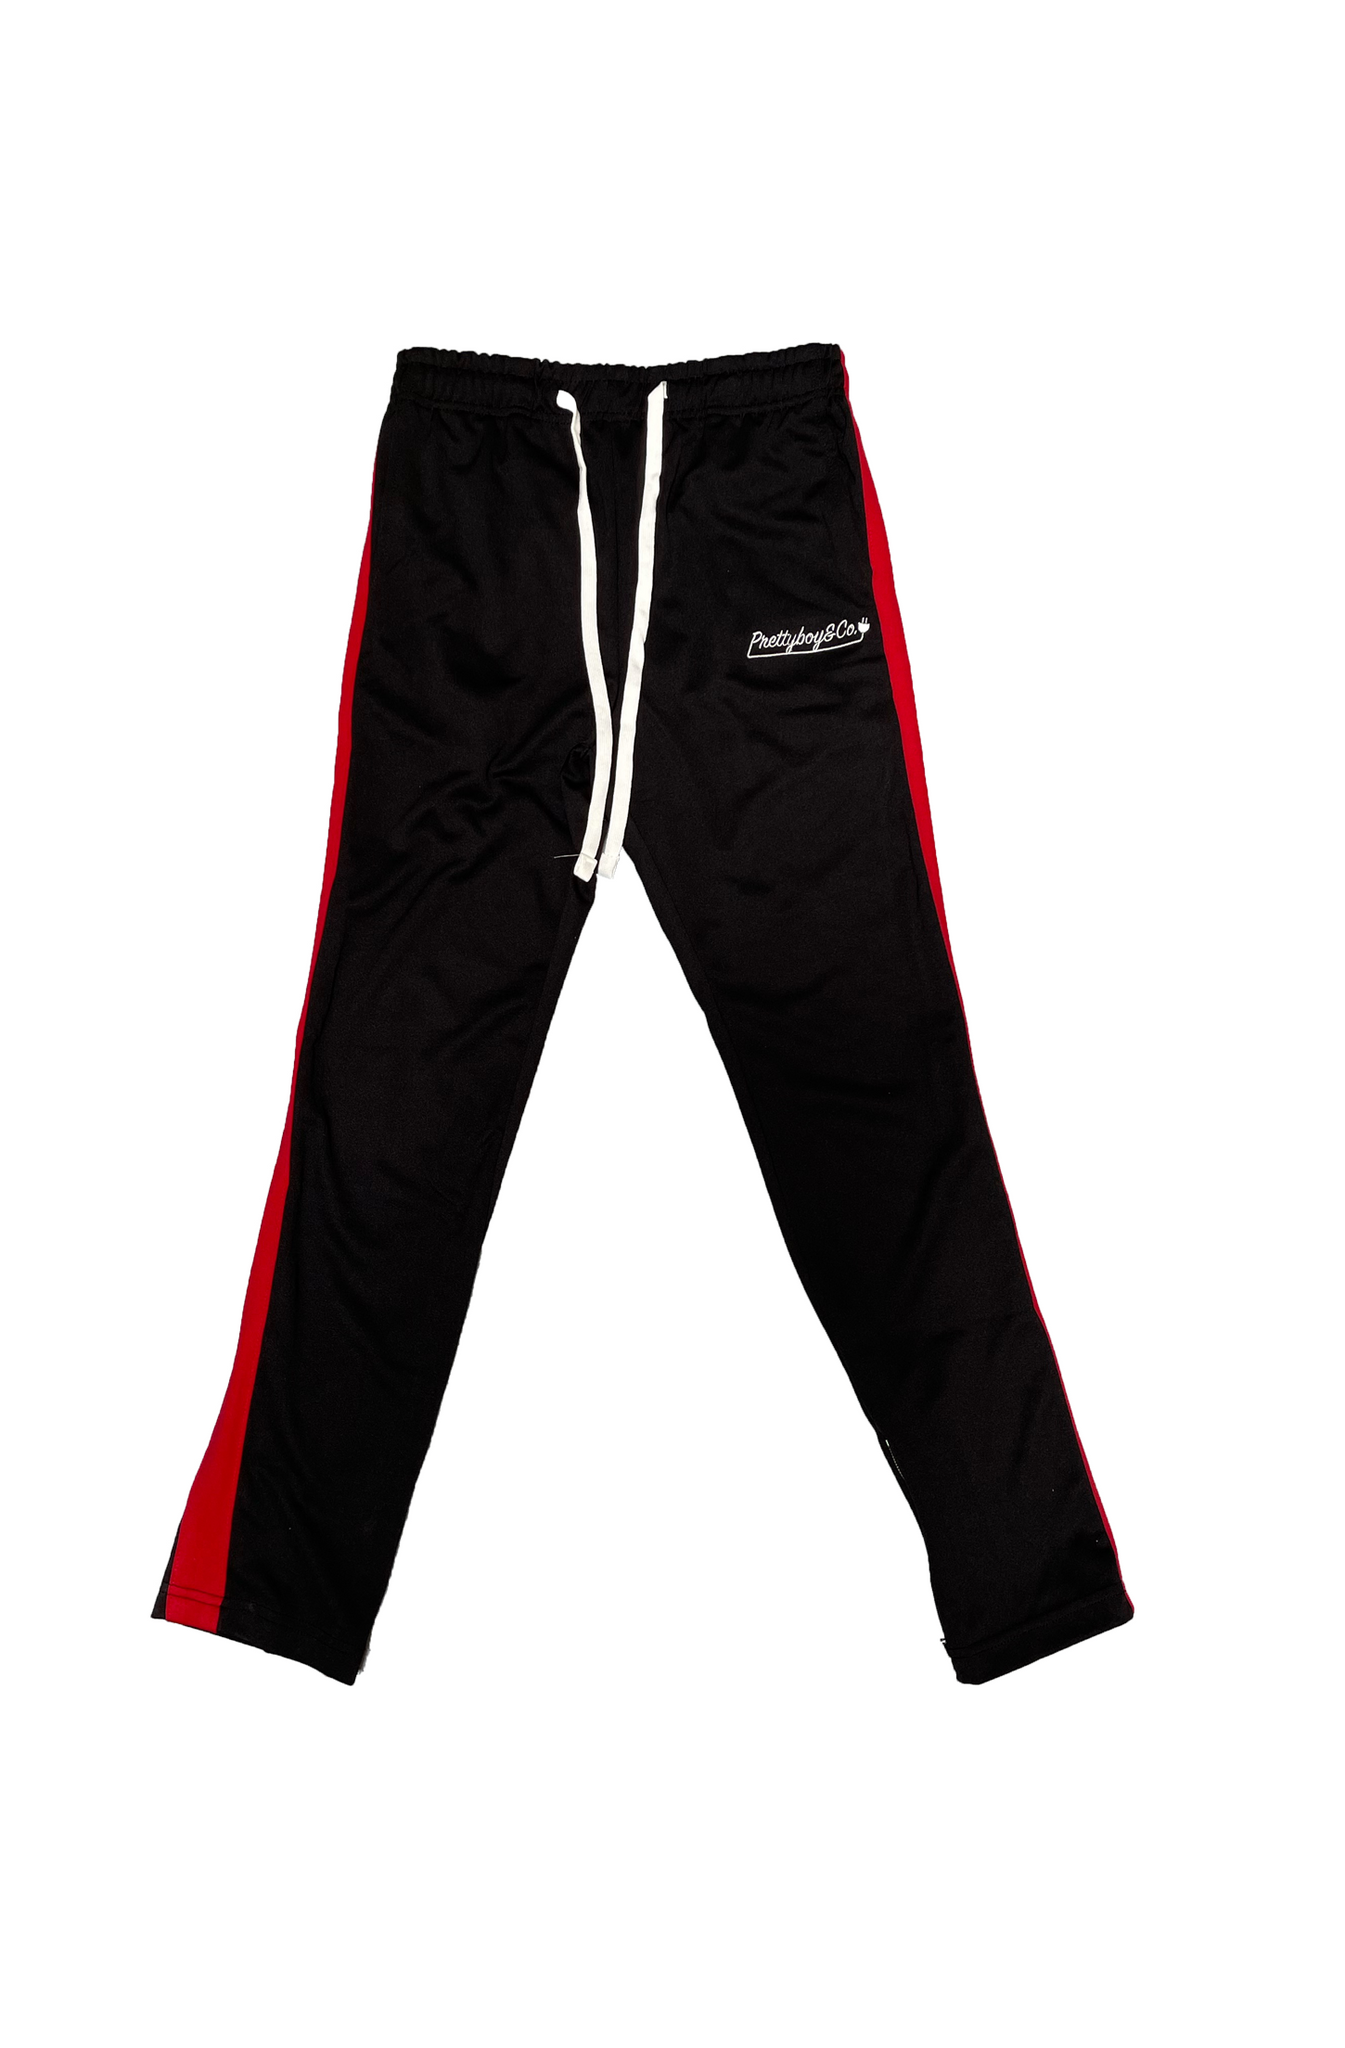 Black/Red Embroidered Track Pants